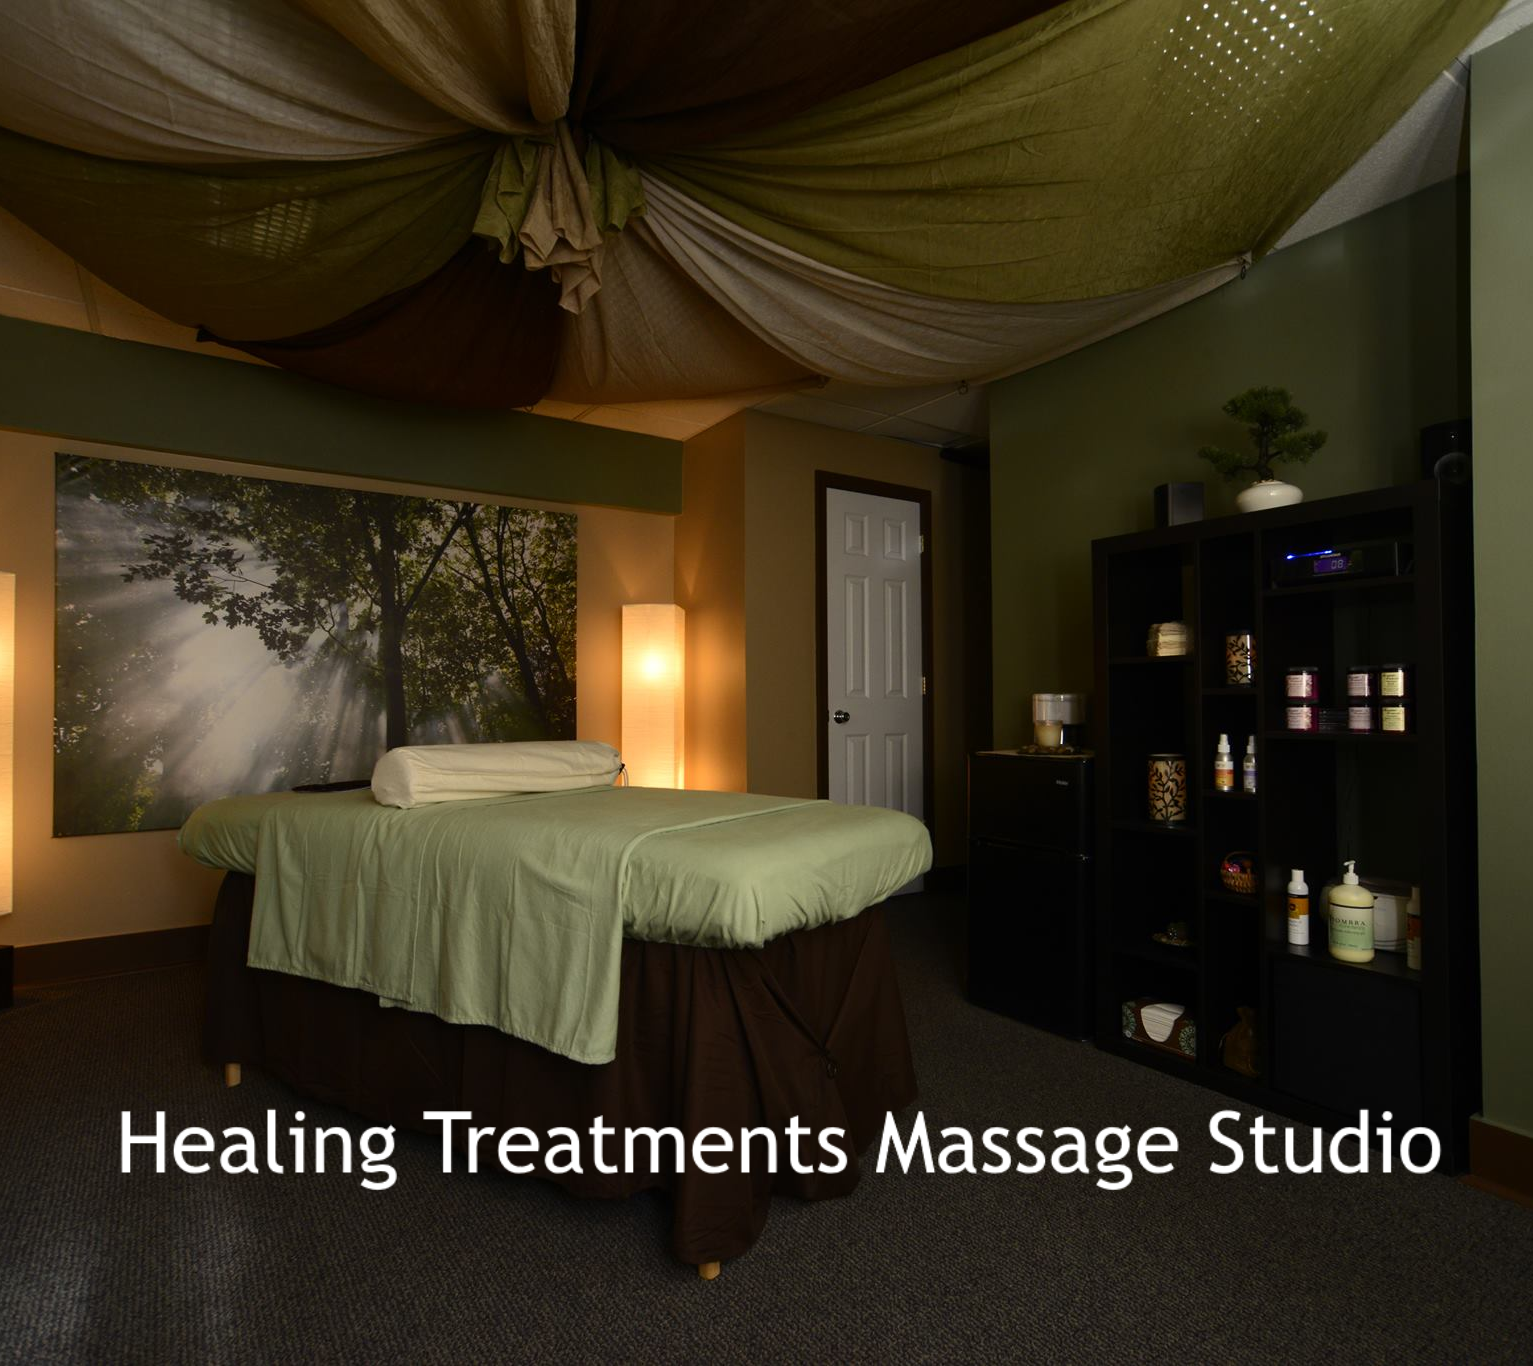 Healing Treatments Massage Studio, links to Facebook page